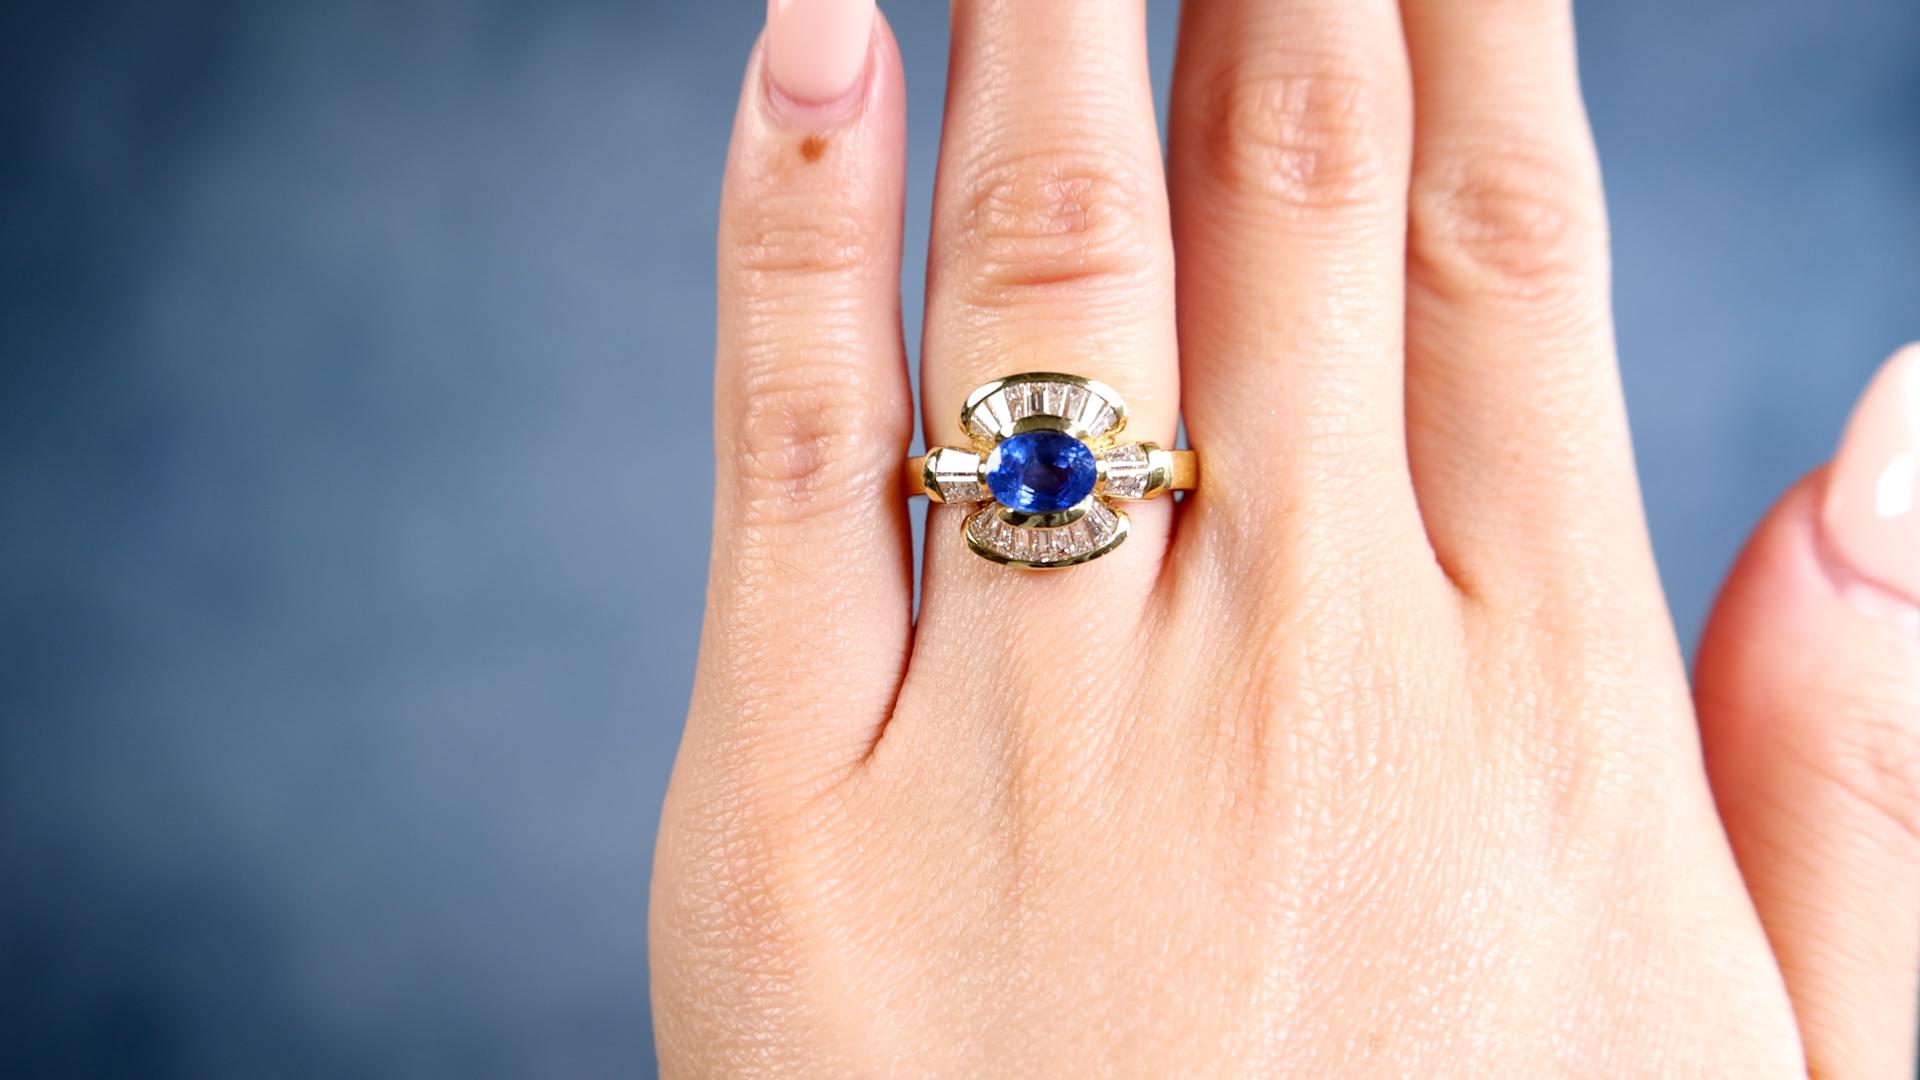 One Vintage Italian Sapphire Diamond 18k Yellow Gold Ring. Featuring one oval mixed cut sapphire weighing approximately 1.00 carat. Accented by 22 tapered baguette cut diamonds with a total weight of approximately 1.10 carats, graded F-G color, VS